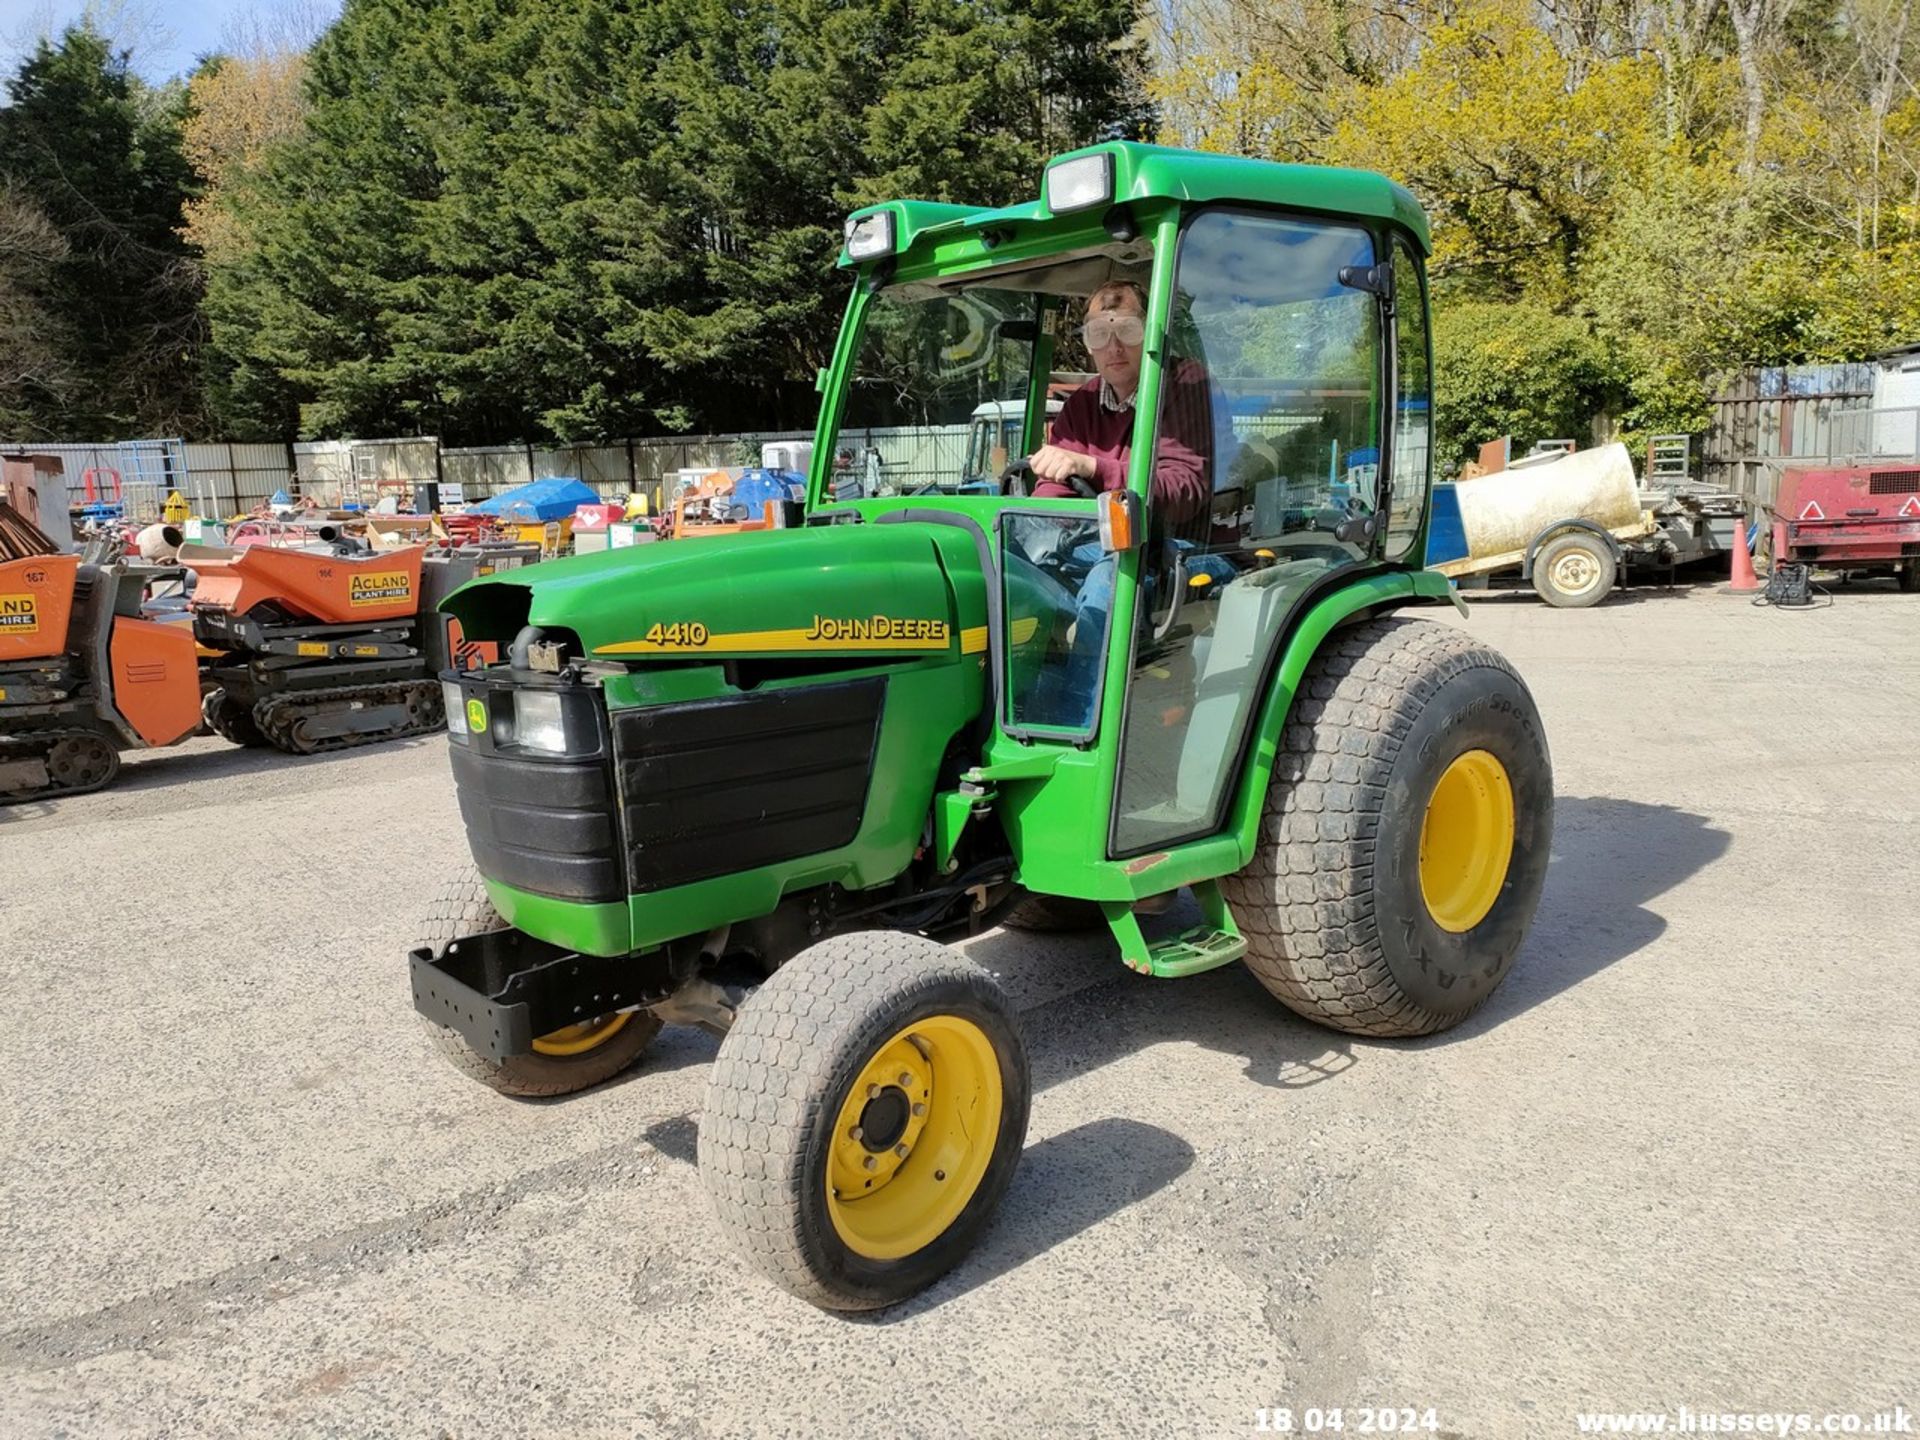 JOHN DEERE 4410 35HP TRACTOR 5410HRS SHUTTLE BRAKES NEED ATTENTION, NO FRONT WNDSCREEN - Image 3 of 18